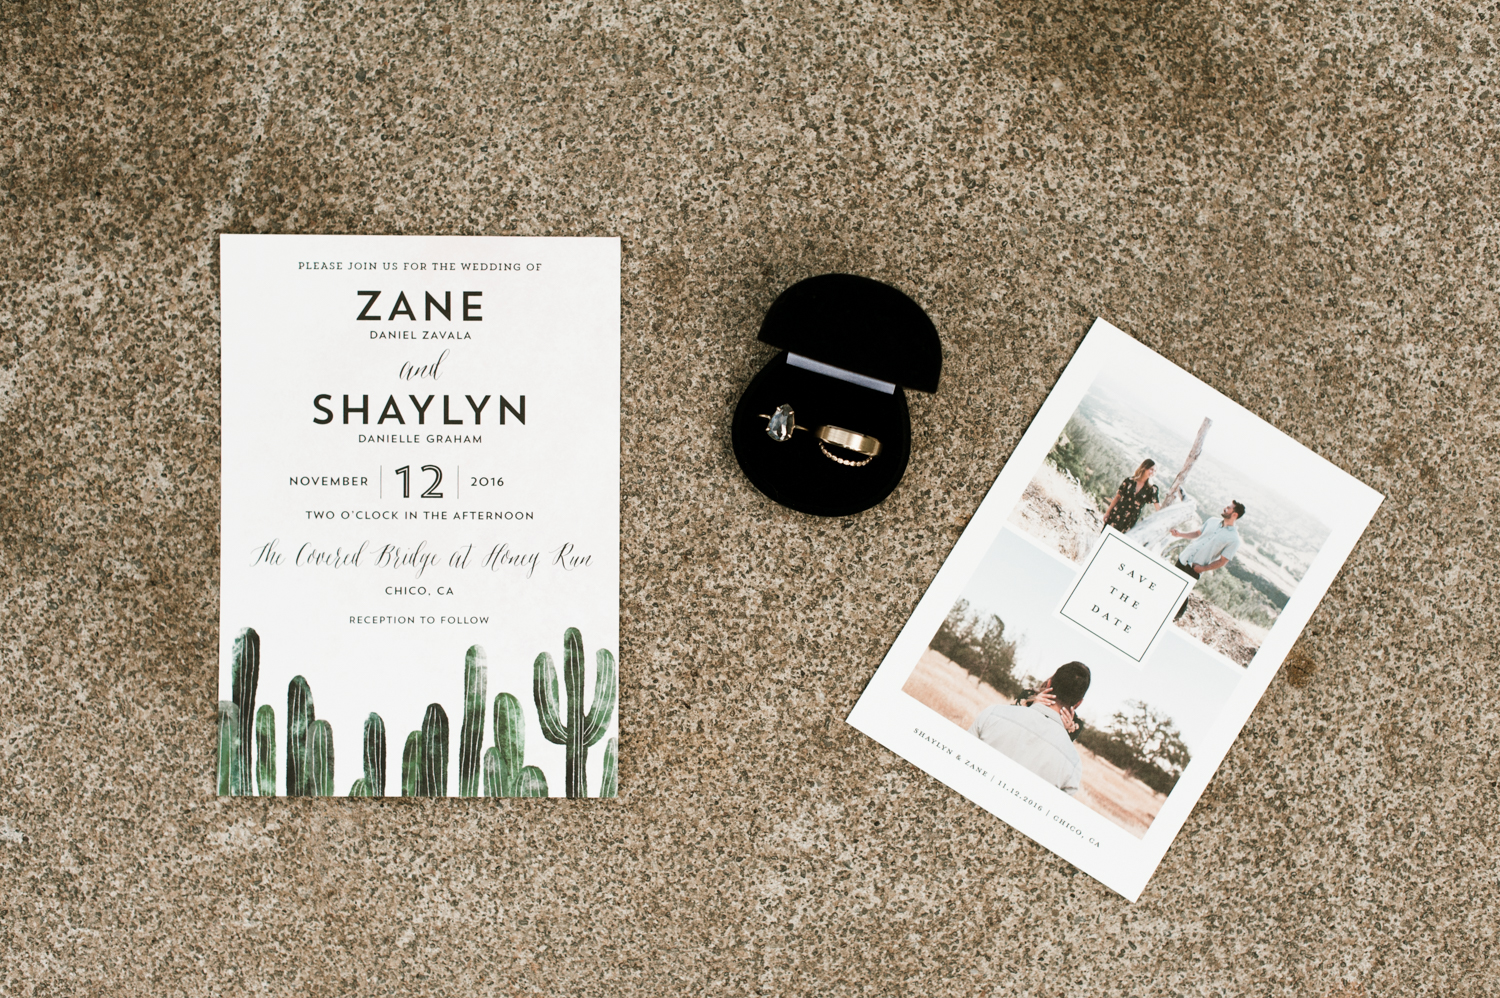 Beautiful wedding stationery and rings. By Chico Wedding Photographer Briana Morrison